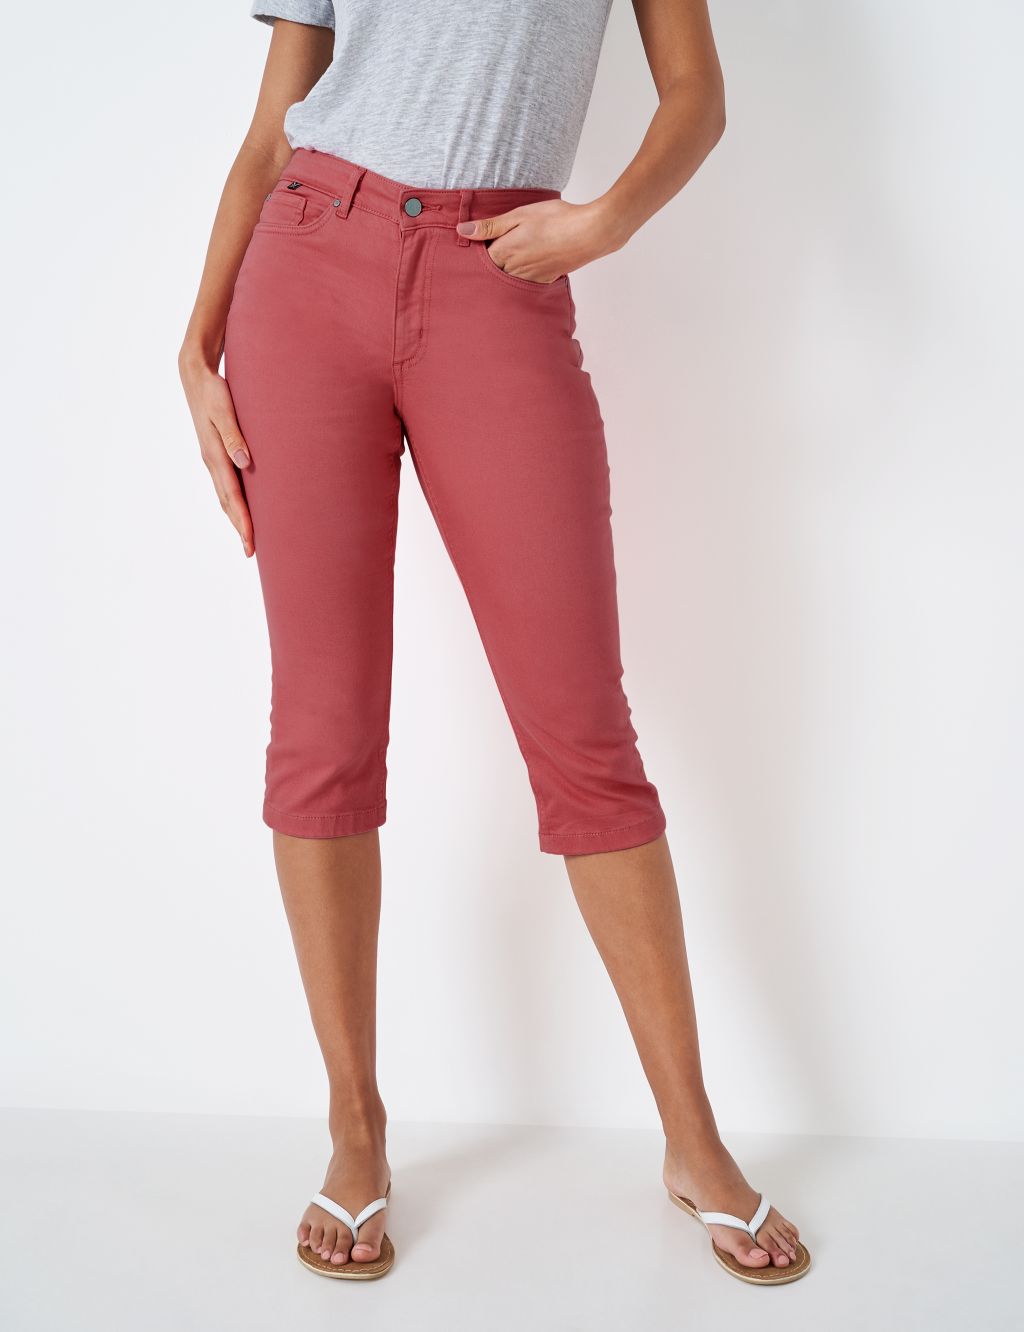 Skinny Cropped Jeans image 2